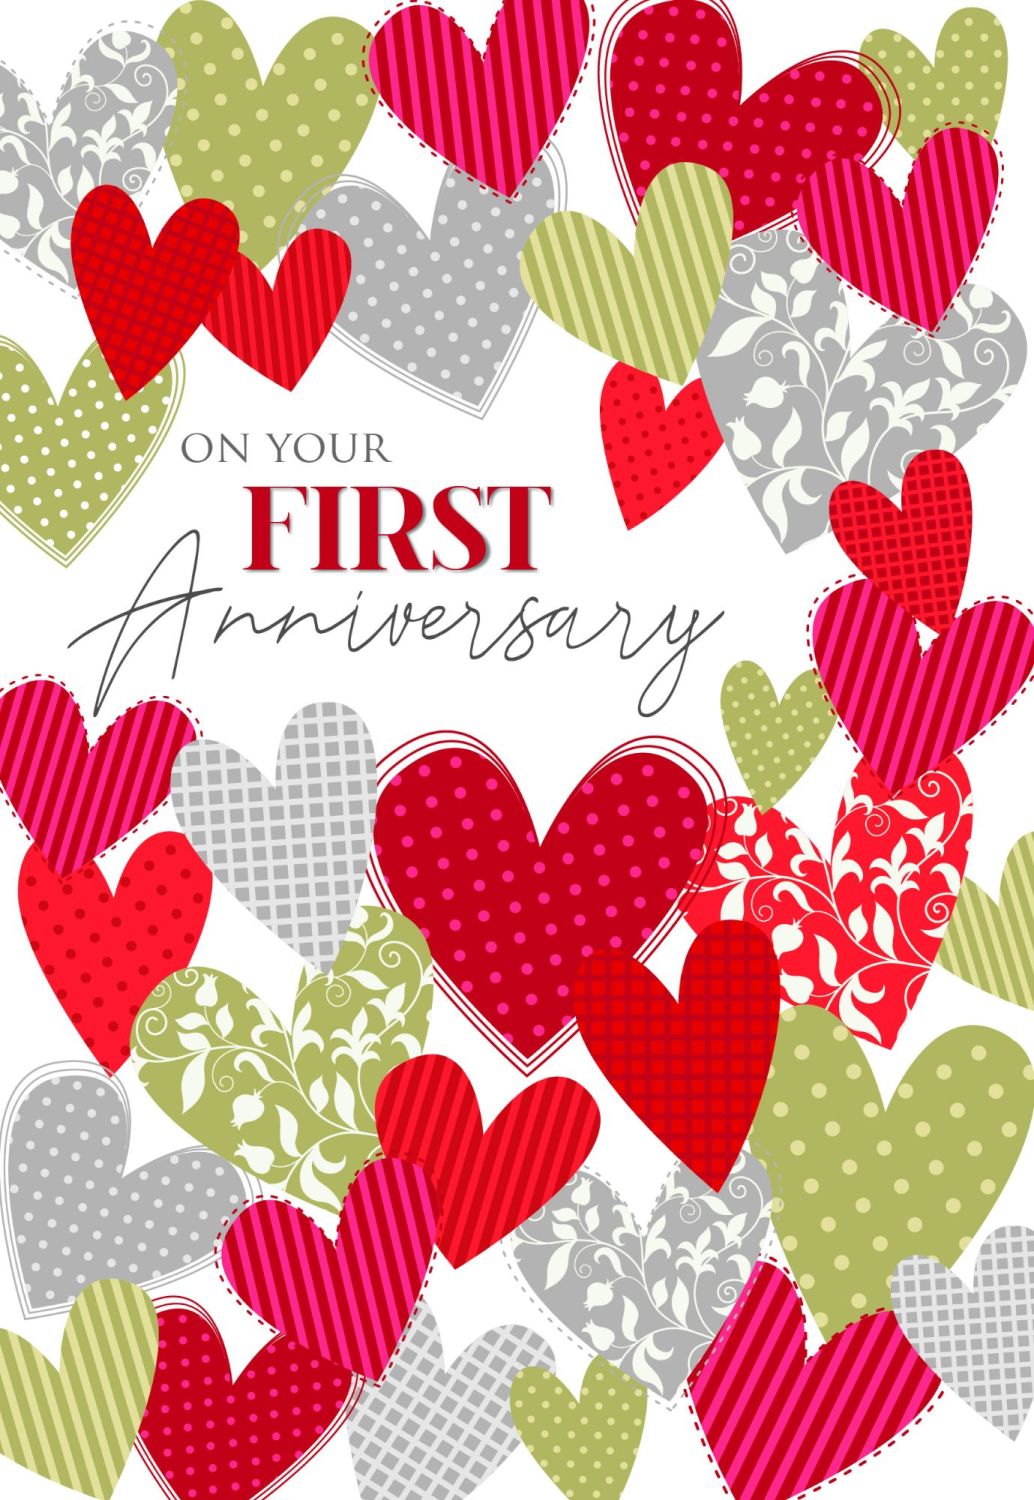 1st anniversary cards - couple anniversary cards - on your first  anniversary - wedding anniversary cards - hearts anniversary cards -  anniversary